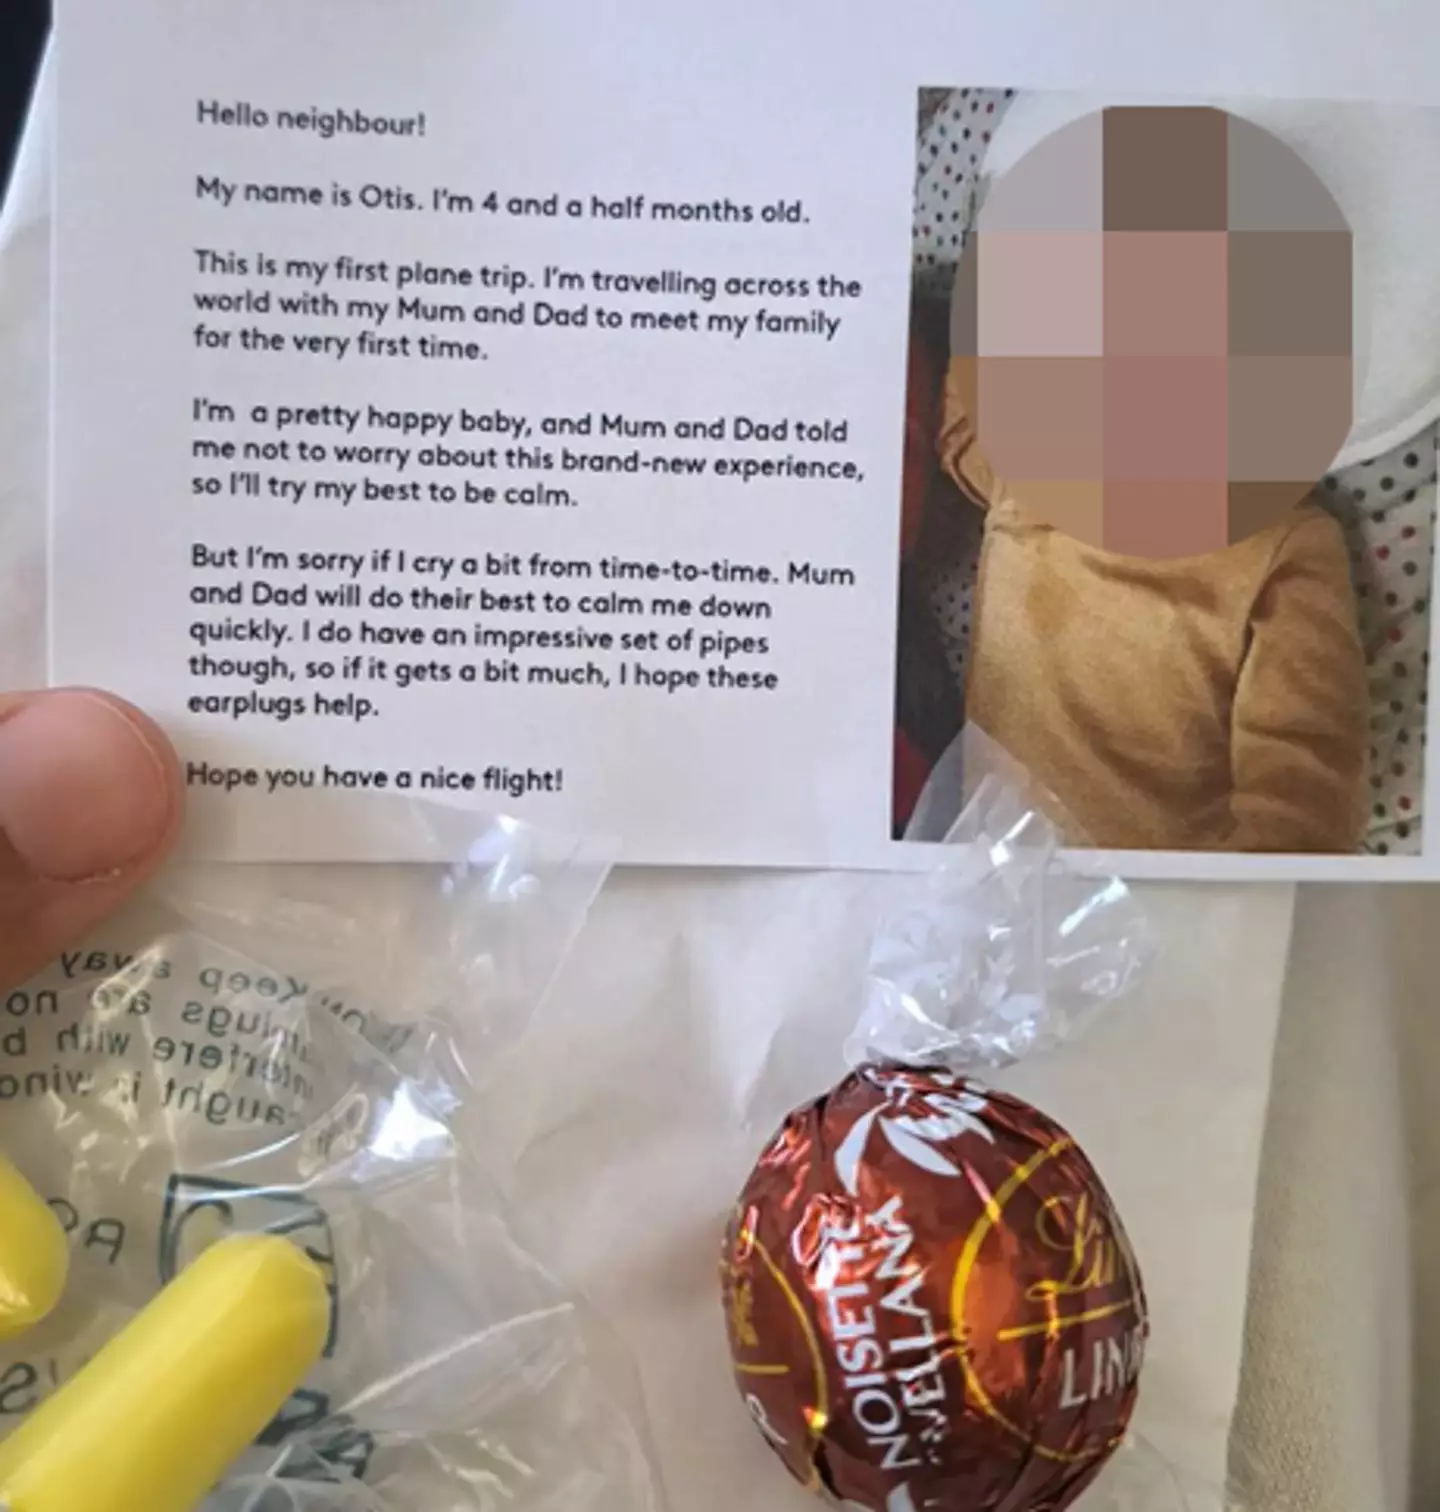 The parents handed out the packages to nearby passengers.